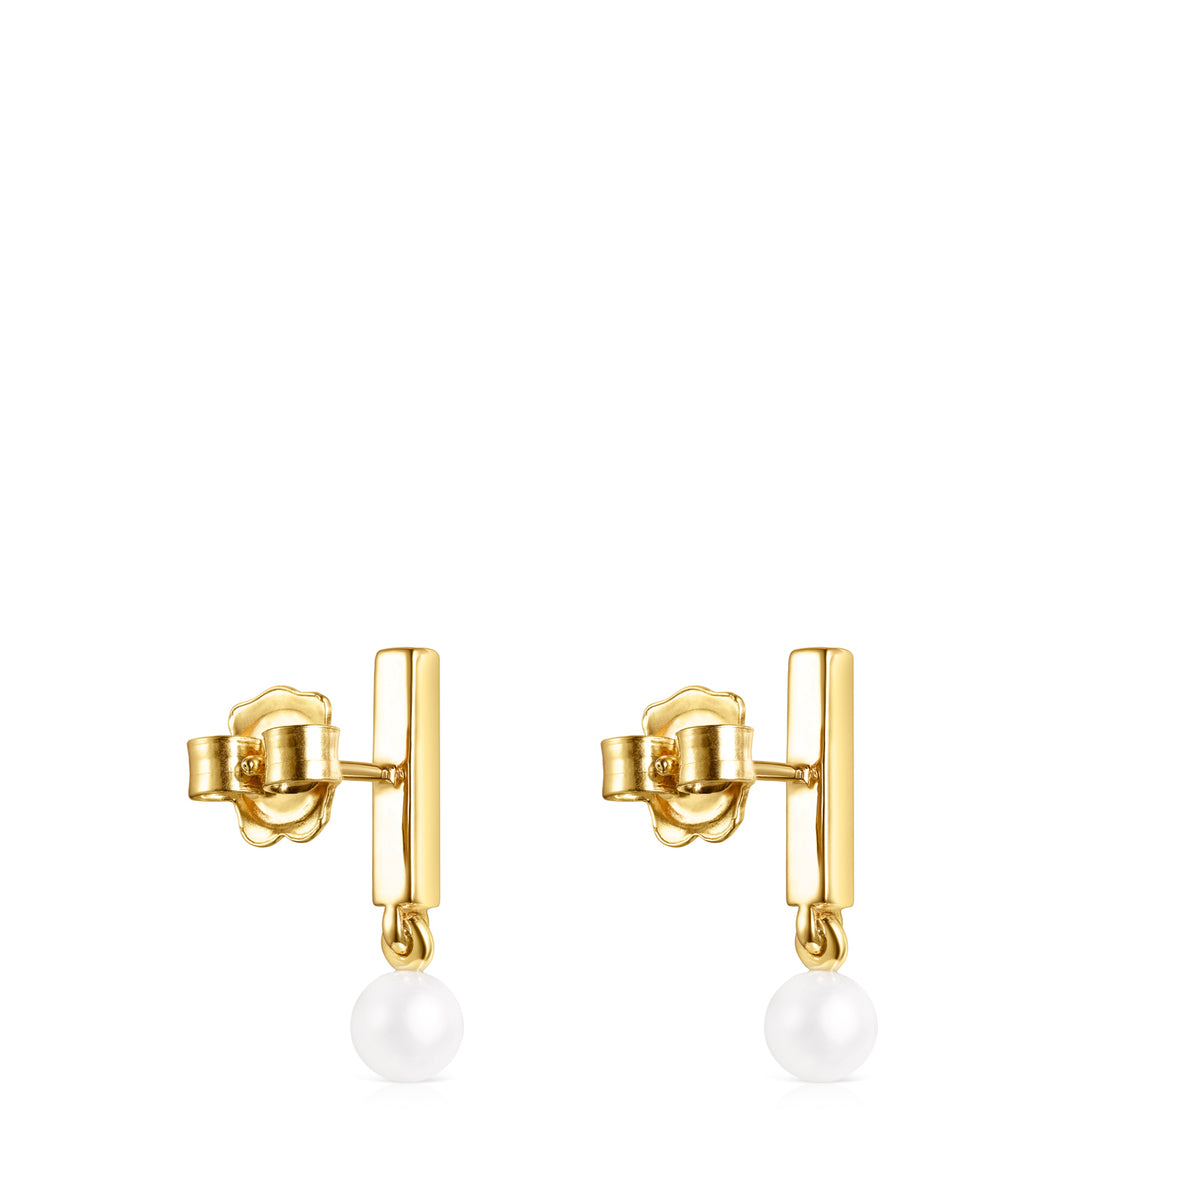 Tous Nocturne bar Earrings in Gold Vermeil with Diamonds and Pearl 918443740